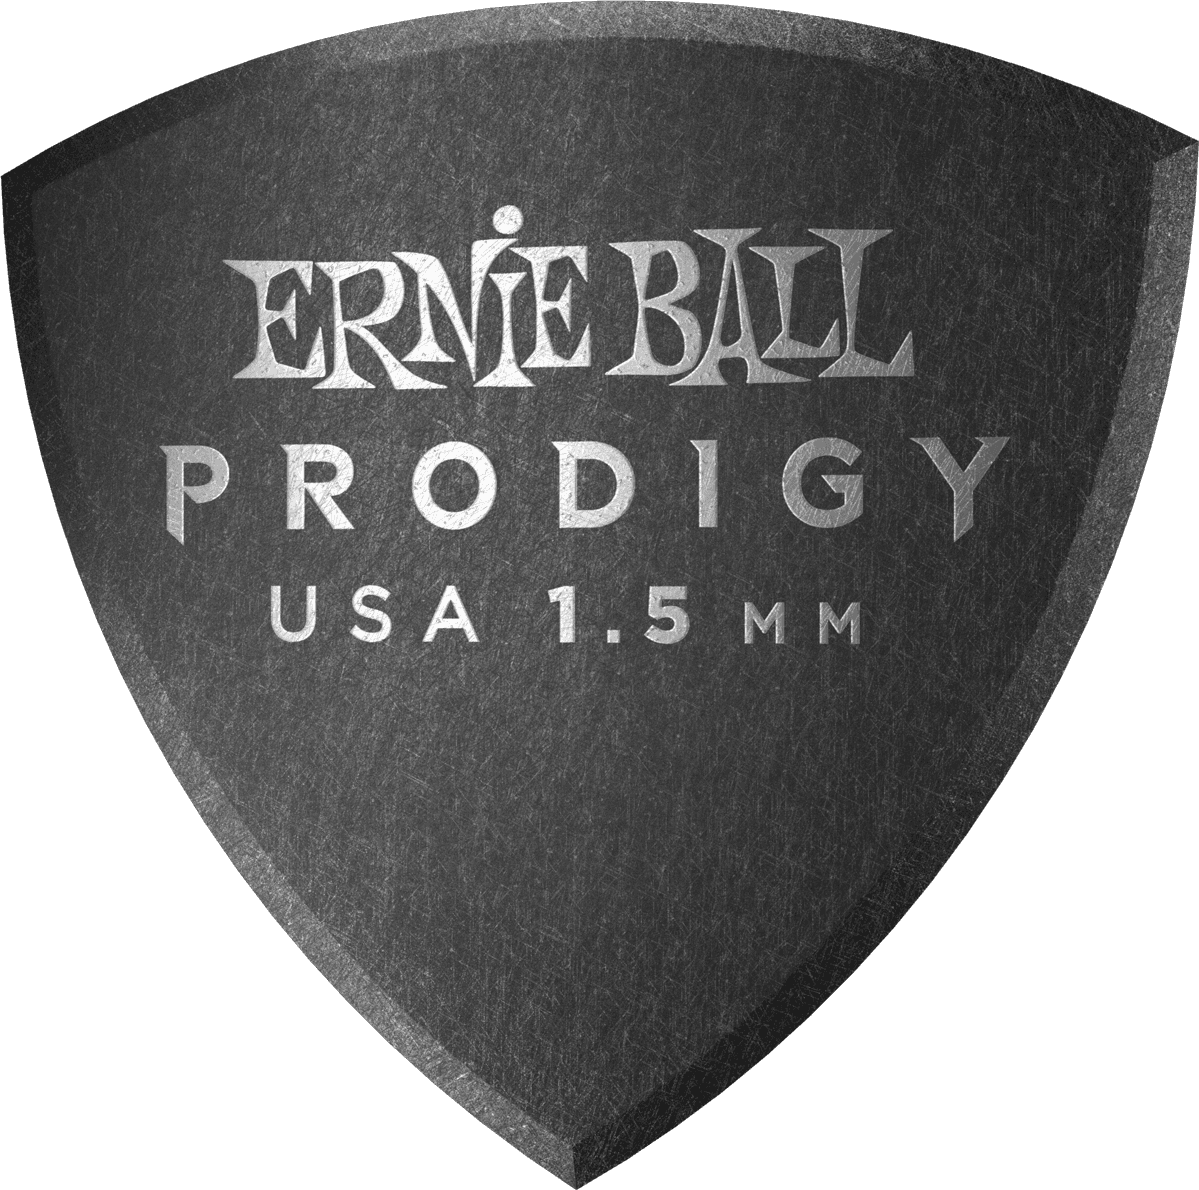 Ernie Ball Prodigy Shield Large 1,5mm (x6 Pack) - MÉdiator & Onglet - Main picture